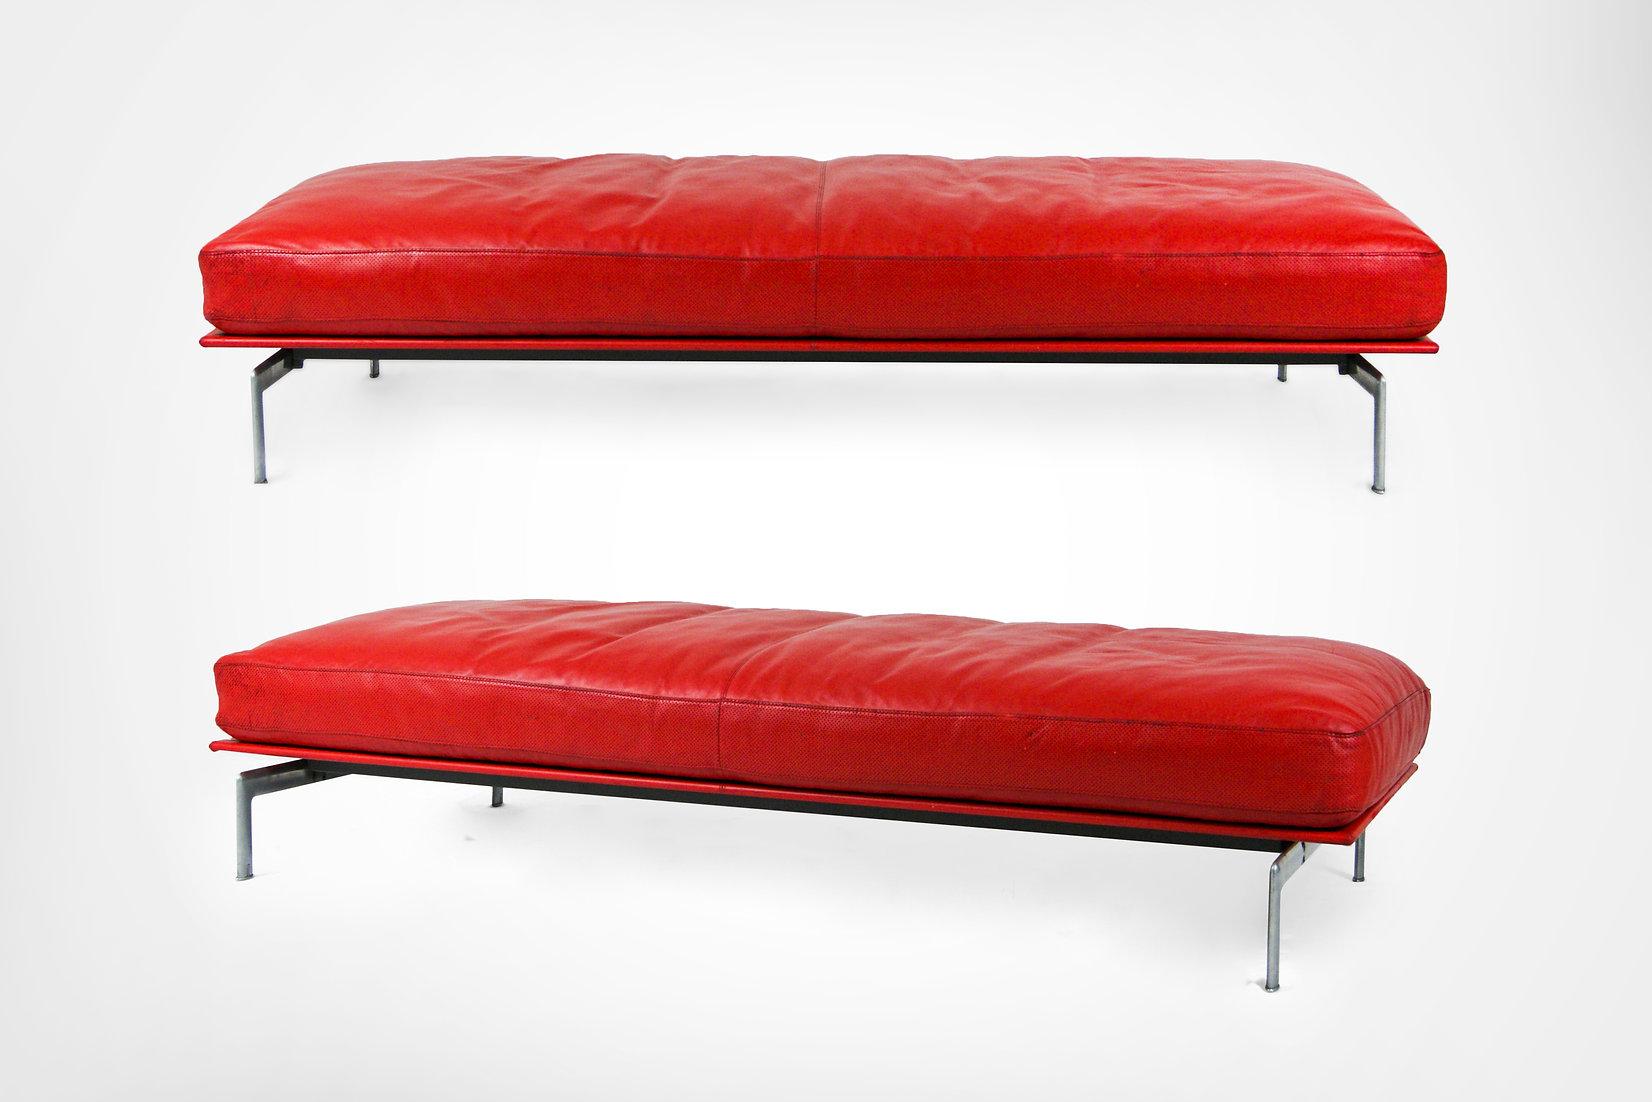 Other Pair Diesis Daybeds or Benches by Paolo Nava & Antonio Citterio for B&B Italia For Sale